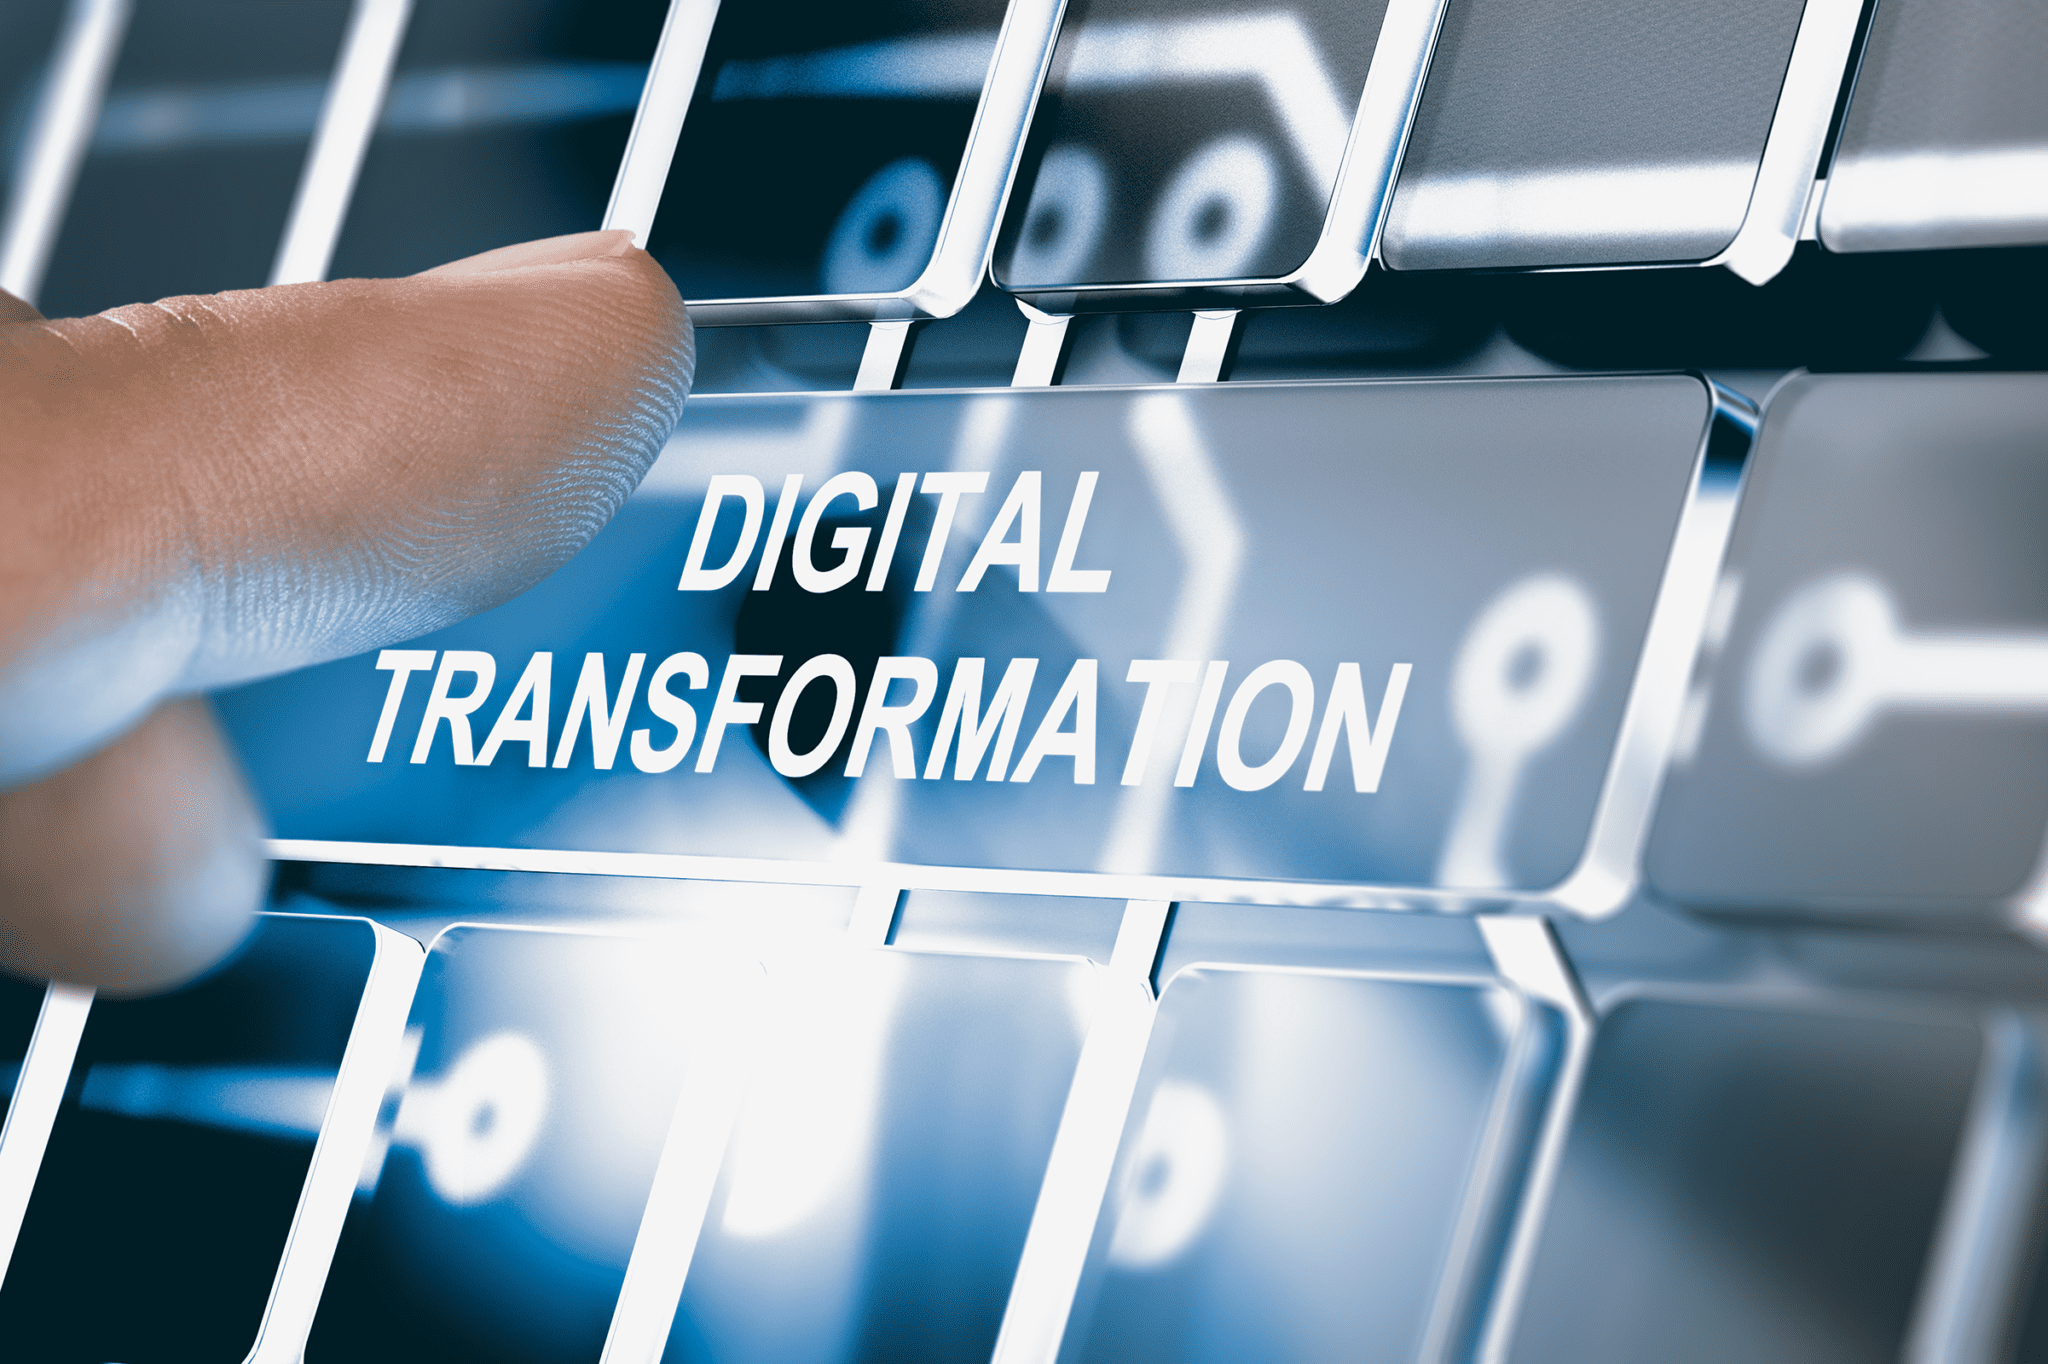 Embarrassed by Your Digital Transformation Skills